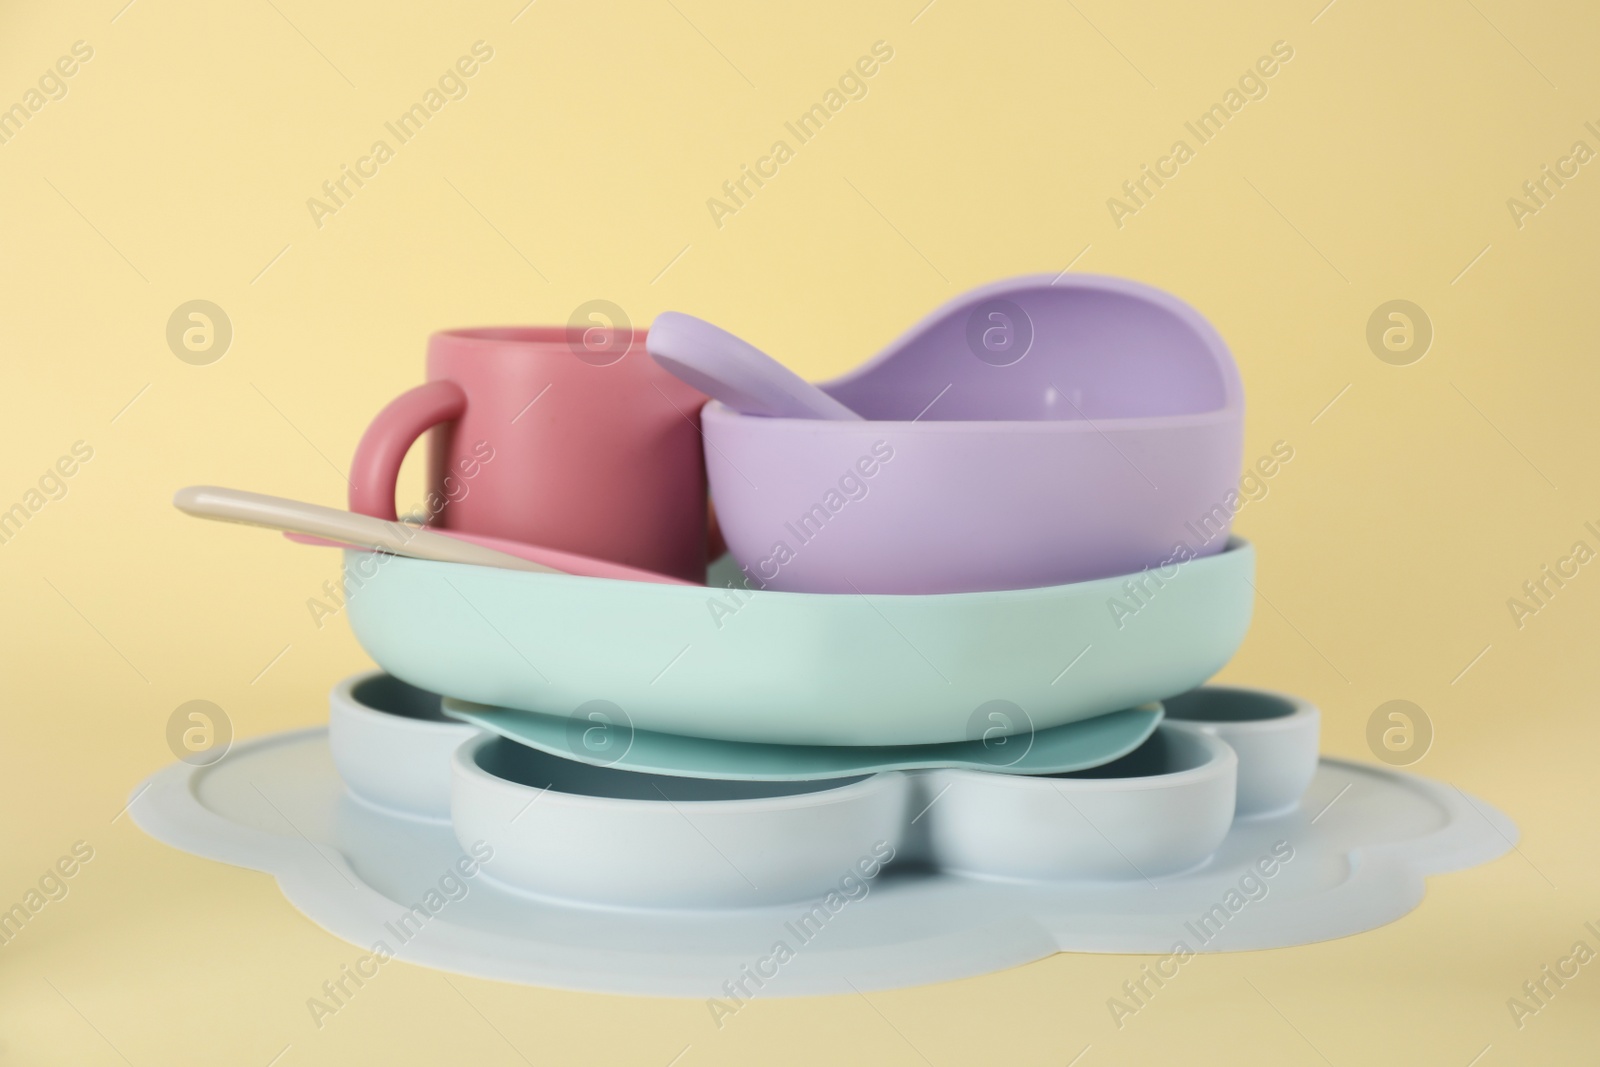 Photo of Set of plastic dishware on beige background. Serving baby food